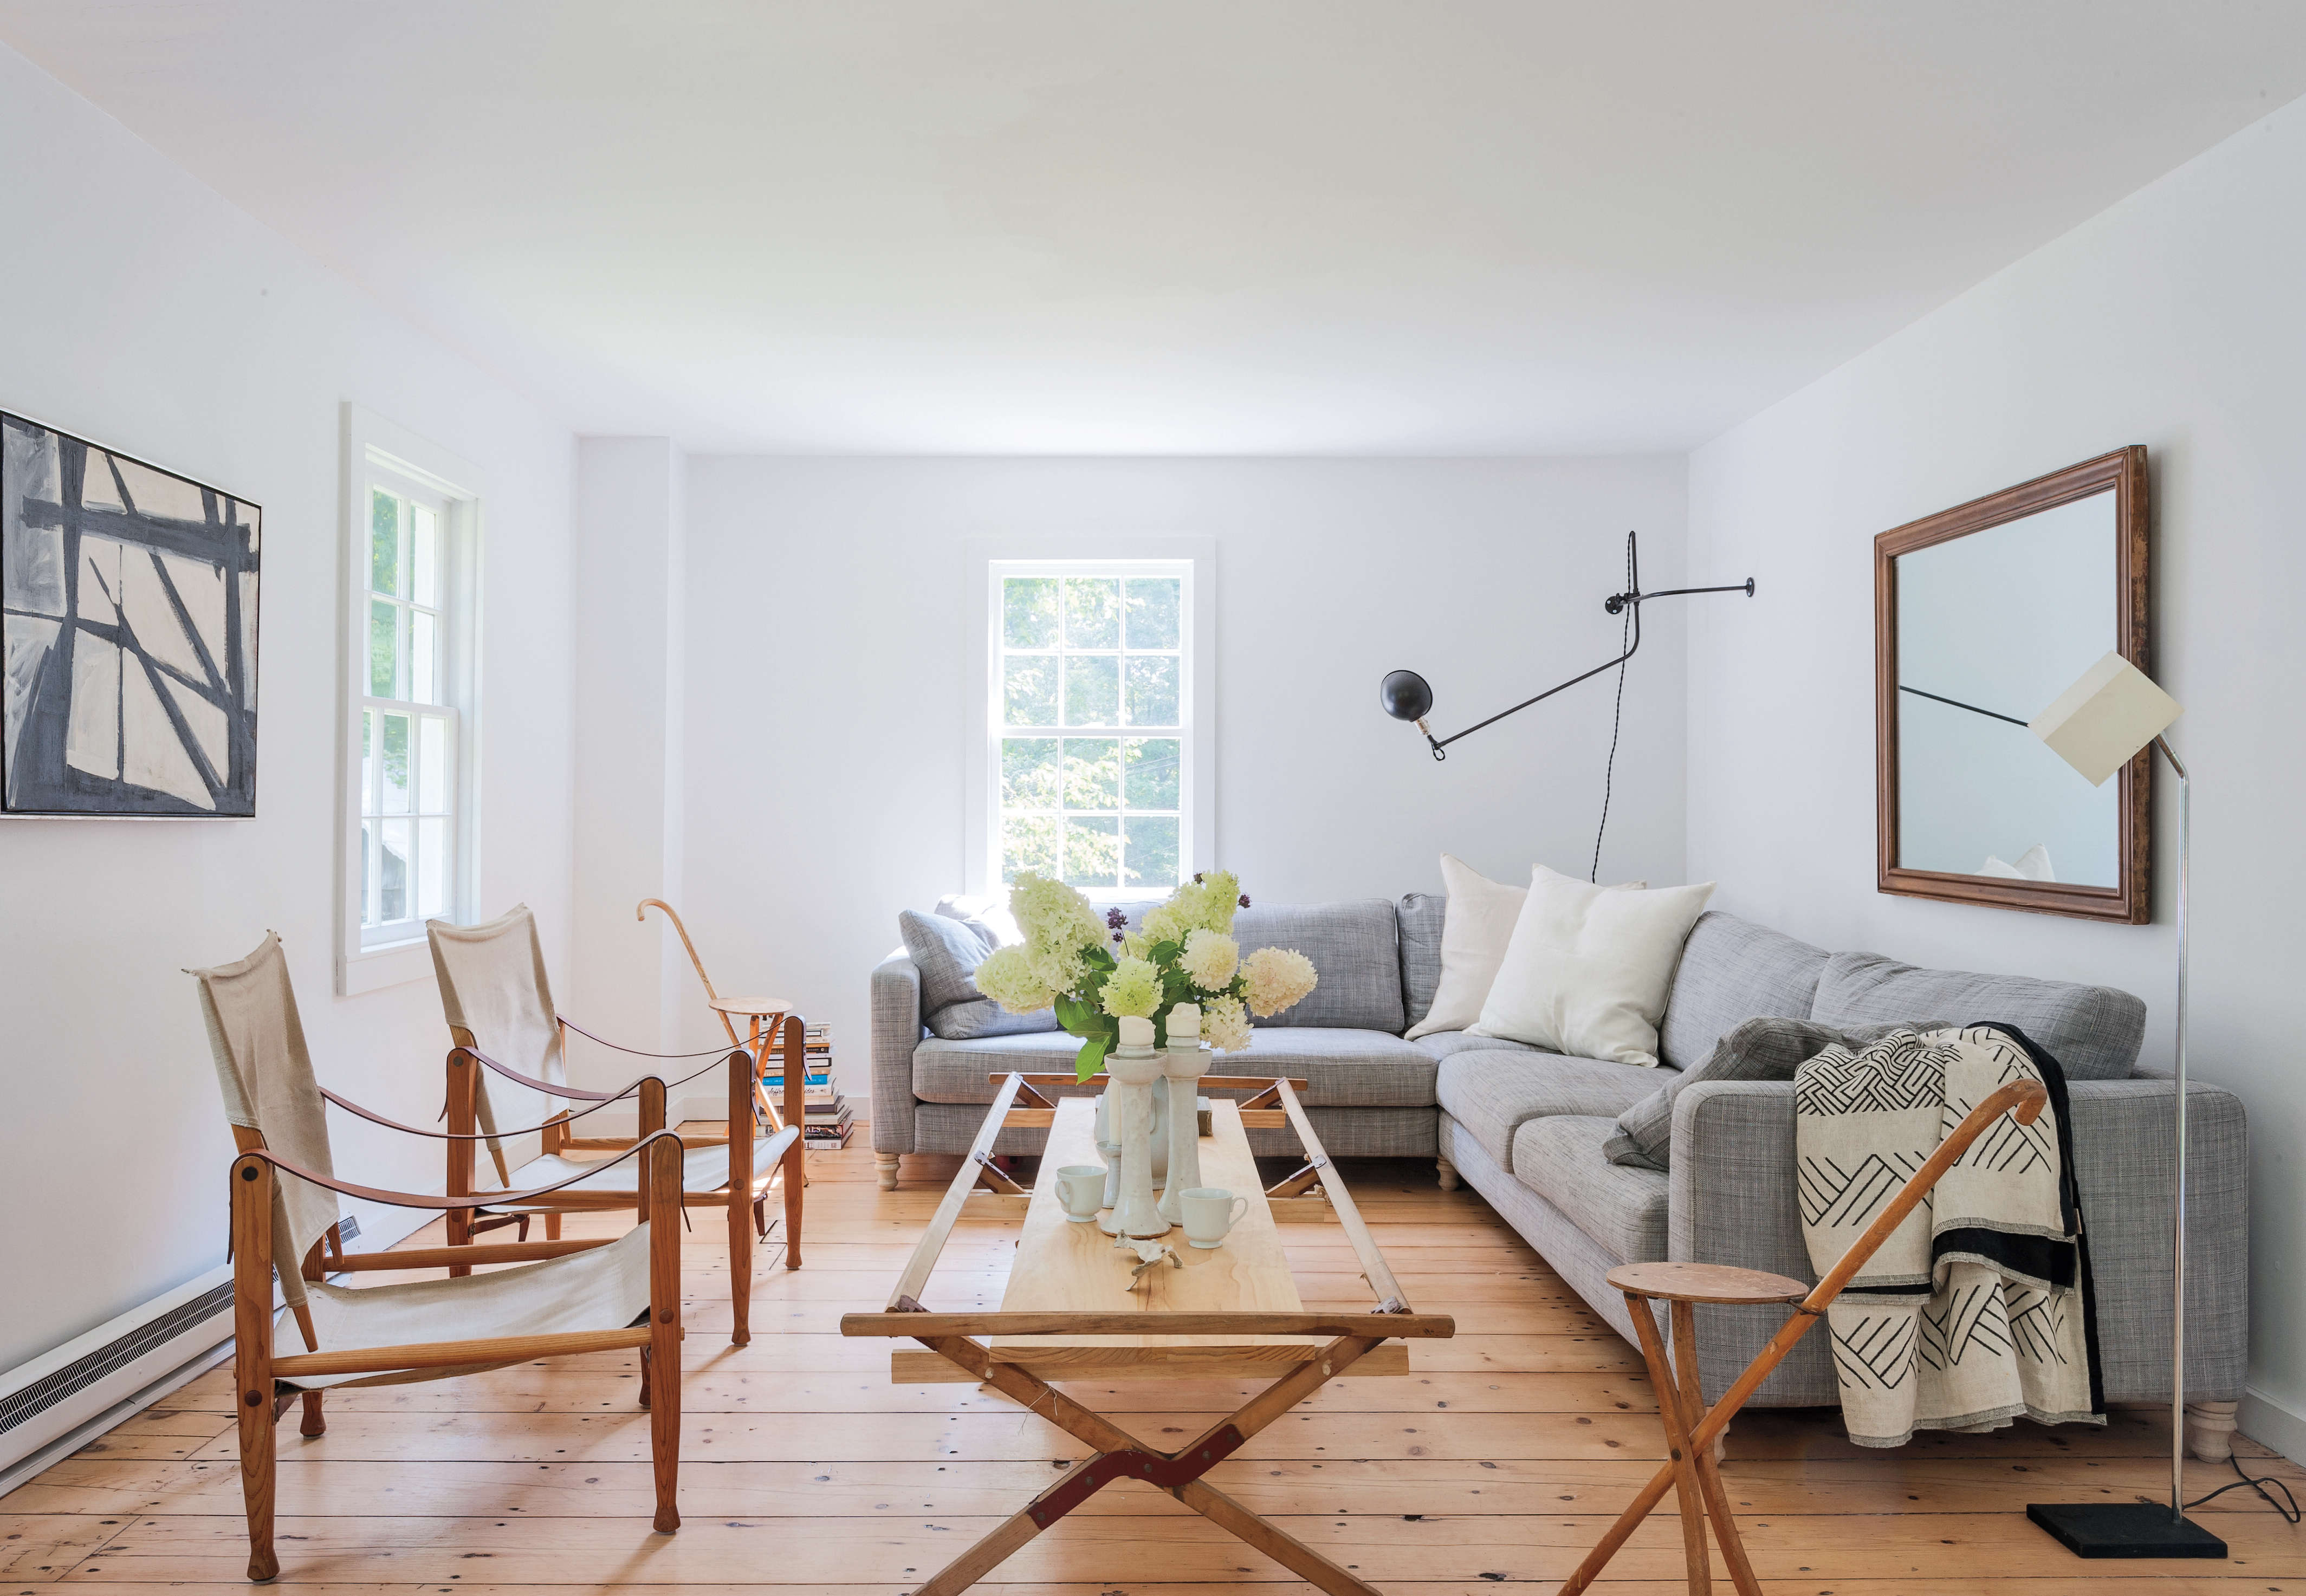 Expert Advice: 11 Tips for Making a Room Look Bigger - Remodelista